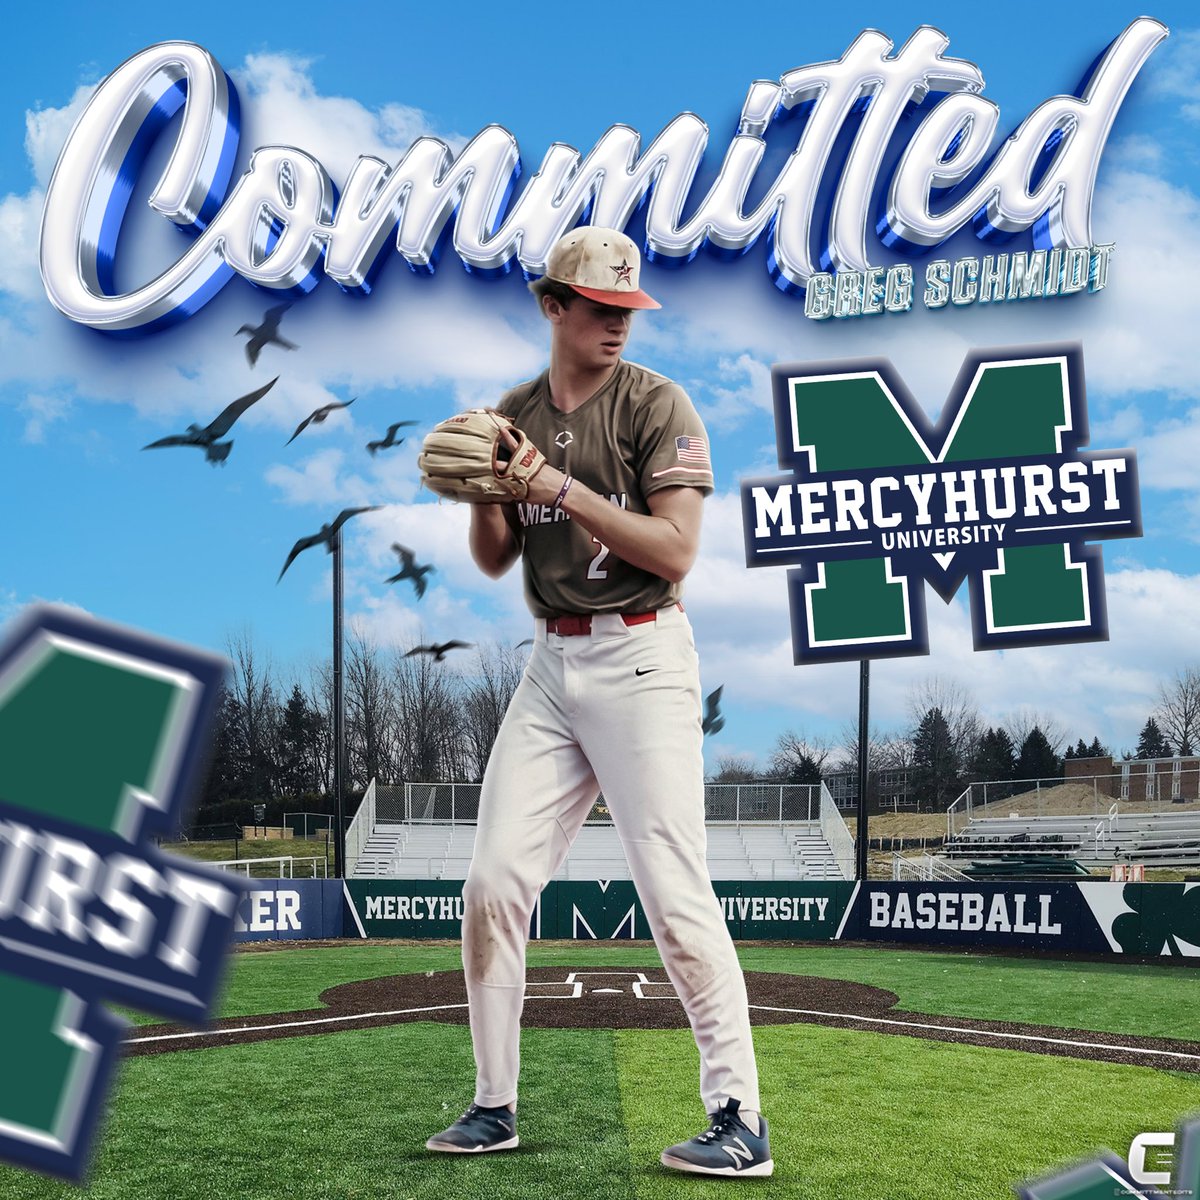 I’m proud to announce my commitment to Mercyhurst University to further my academic and athletic career! I would like to thank my family, coaches, God, and anyone else who has helped me along the way. @JimmyLatona20 @HurstBaseball @PRDBaseball